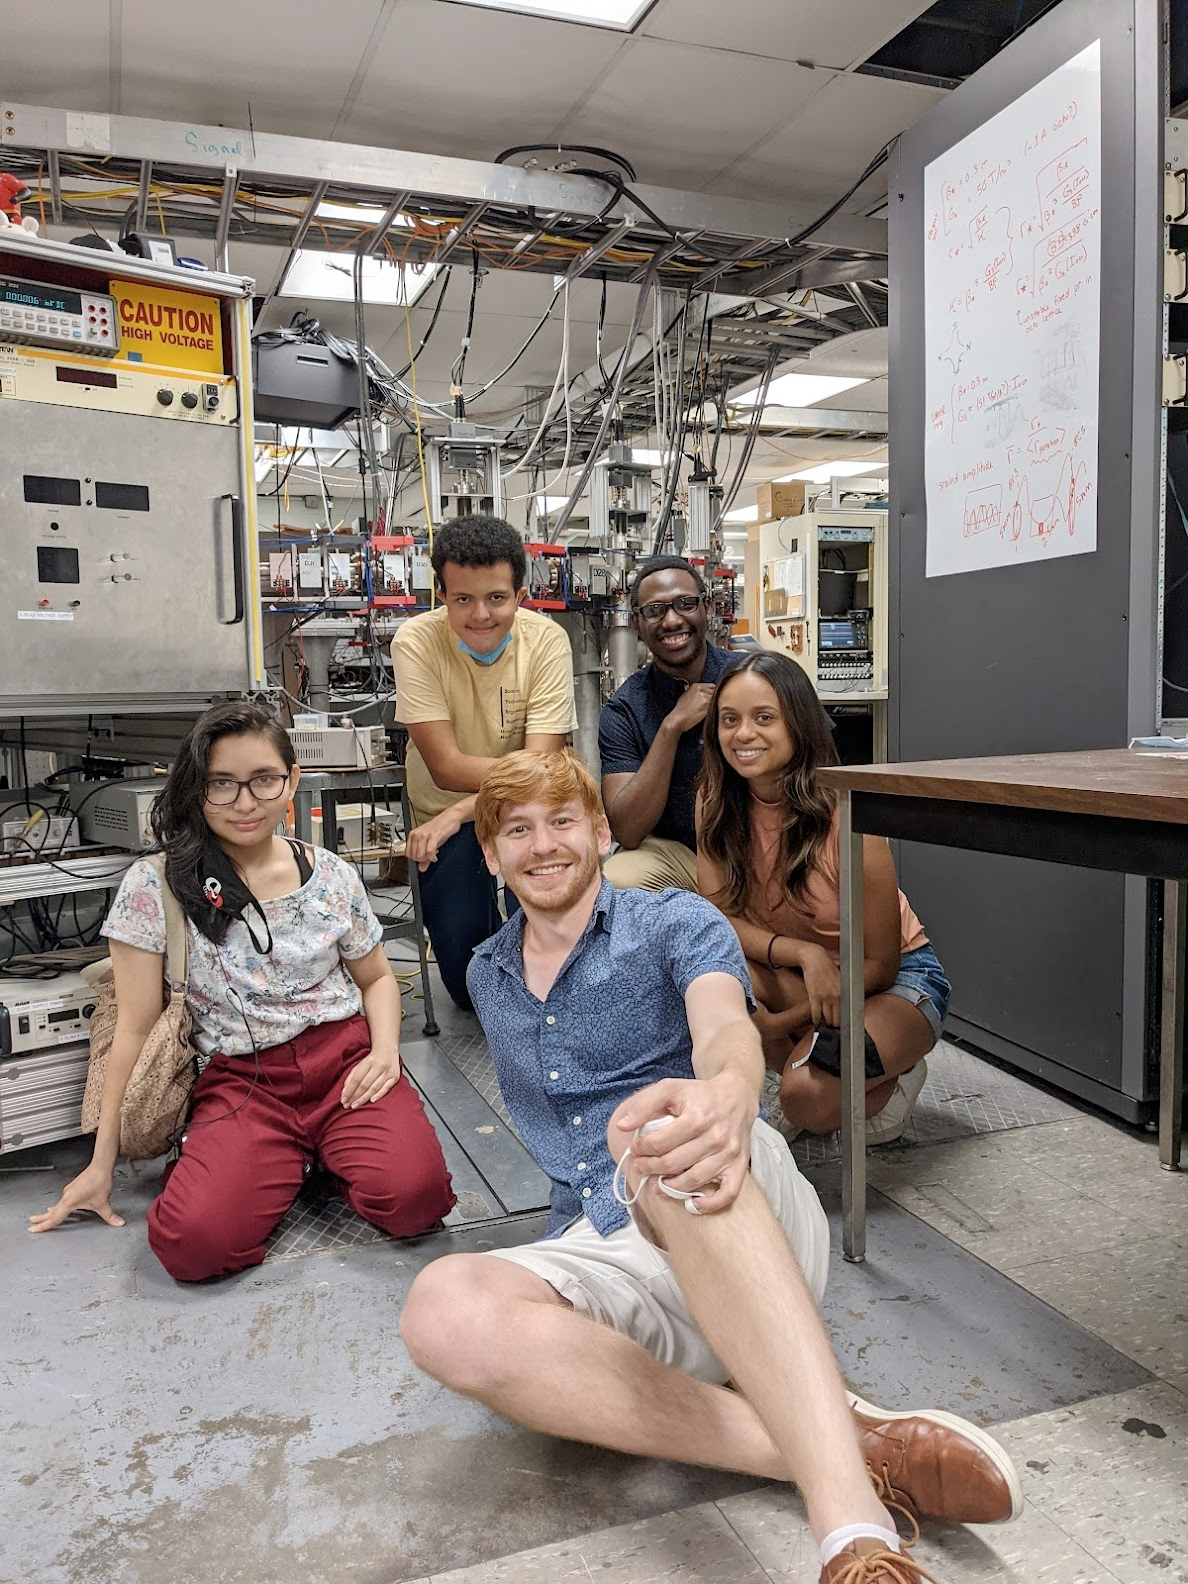  PROPEL participants visited campus toward the end of their summer program to tour physics labs. From left to right: Casey Claveria, Kalkidan Michael, Peter Elgee, Landry Horimbere, Ananya Sitaram.